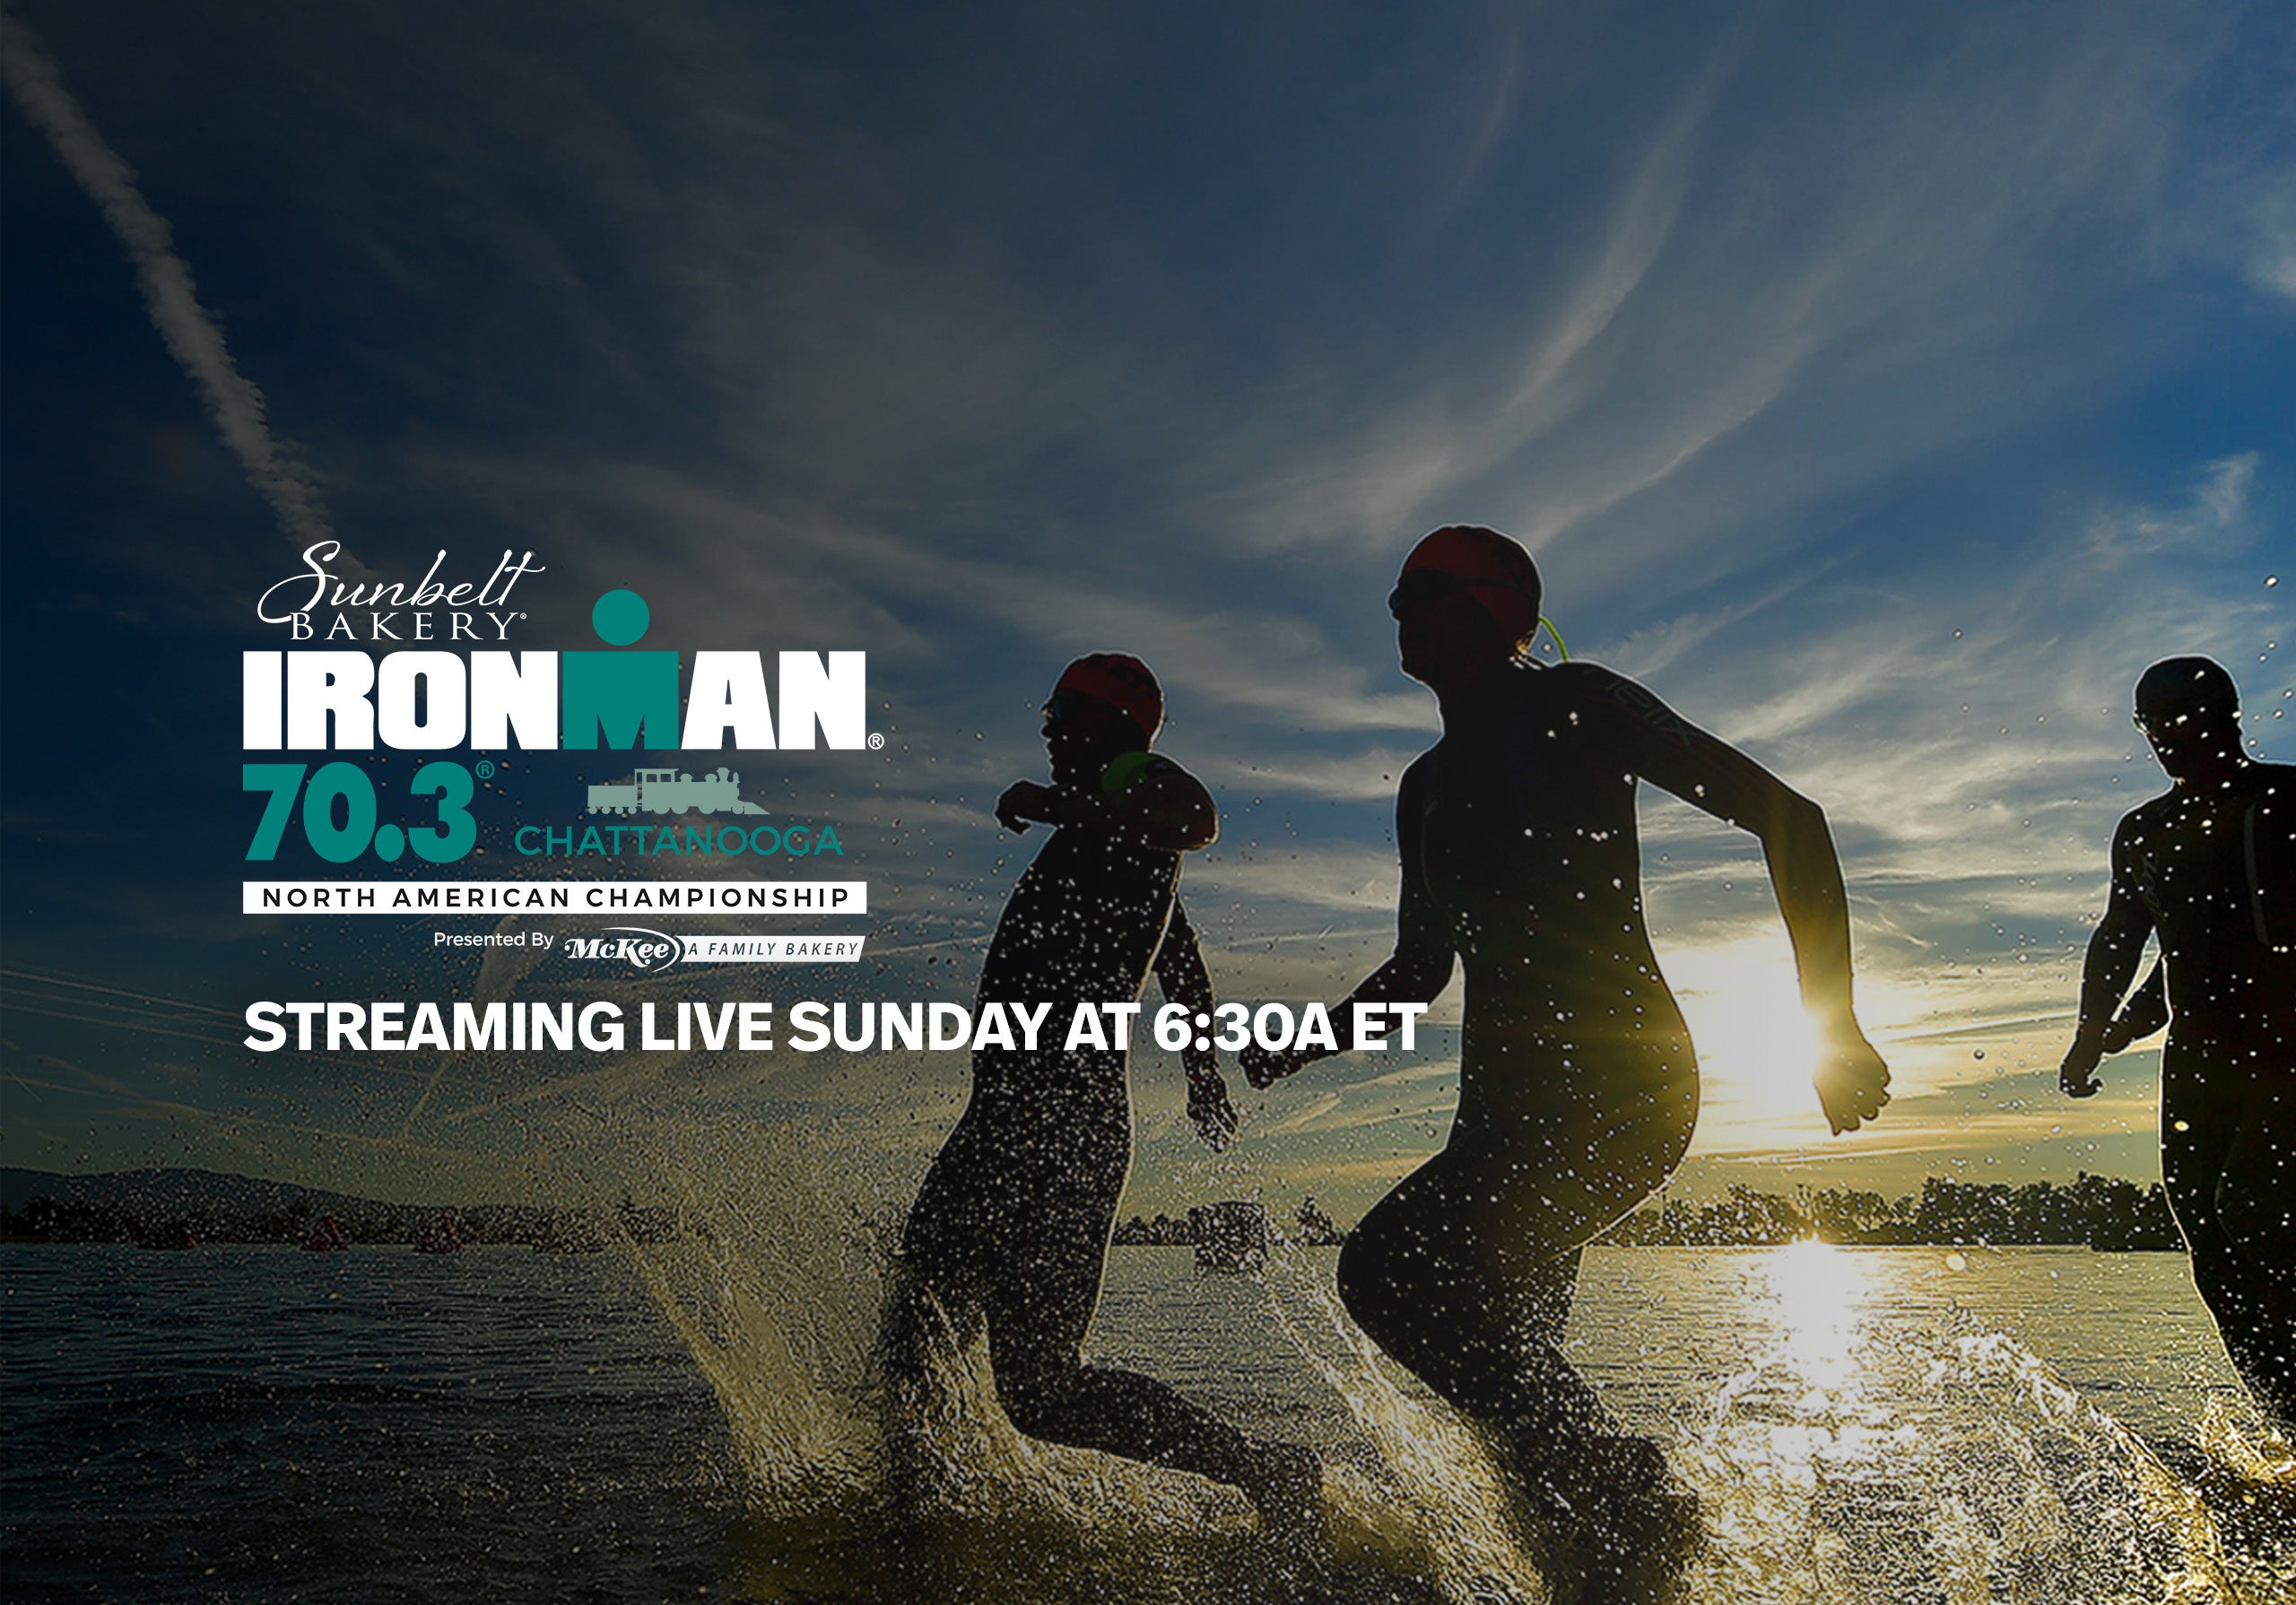 IRONMAN 70.3 from Chattanooga streaming live on Outside